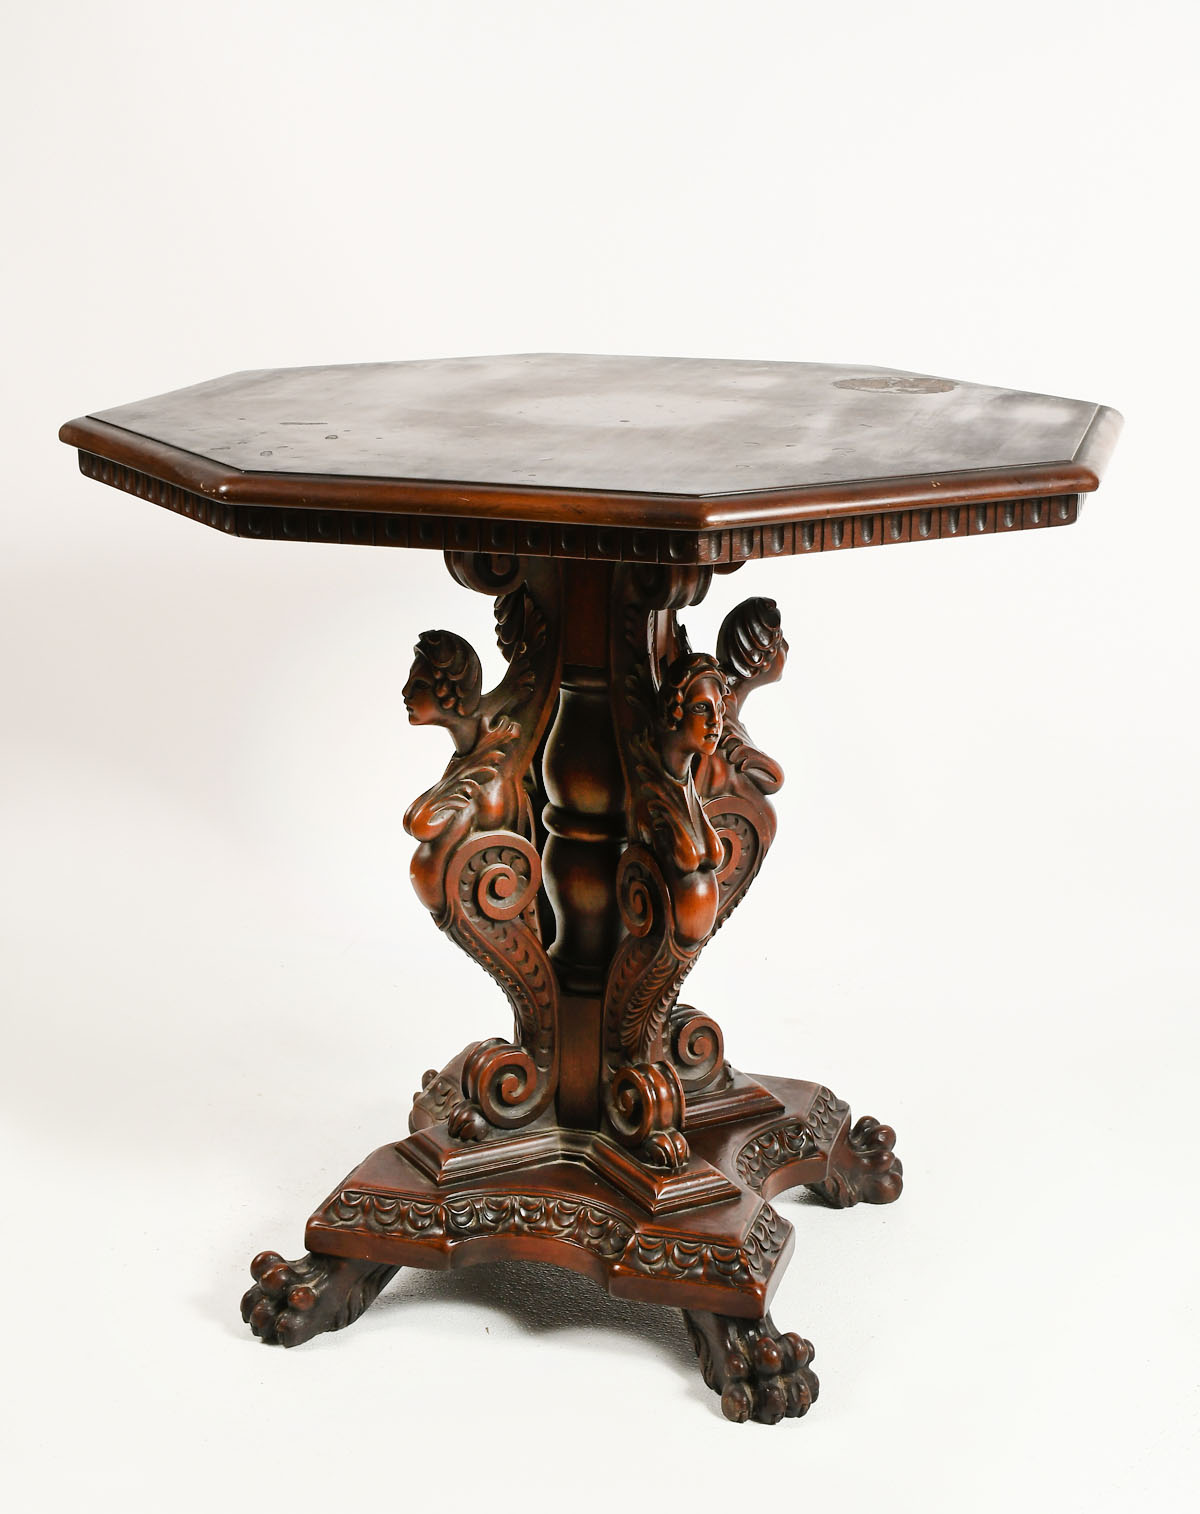 CARVED OCTAGONAL PARLOR TABLE: